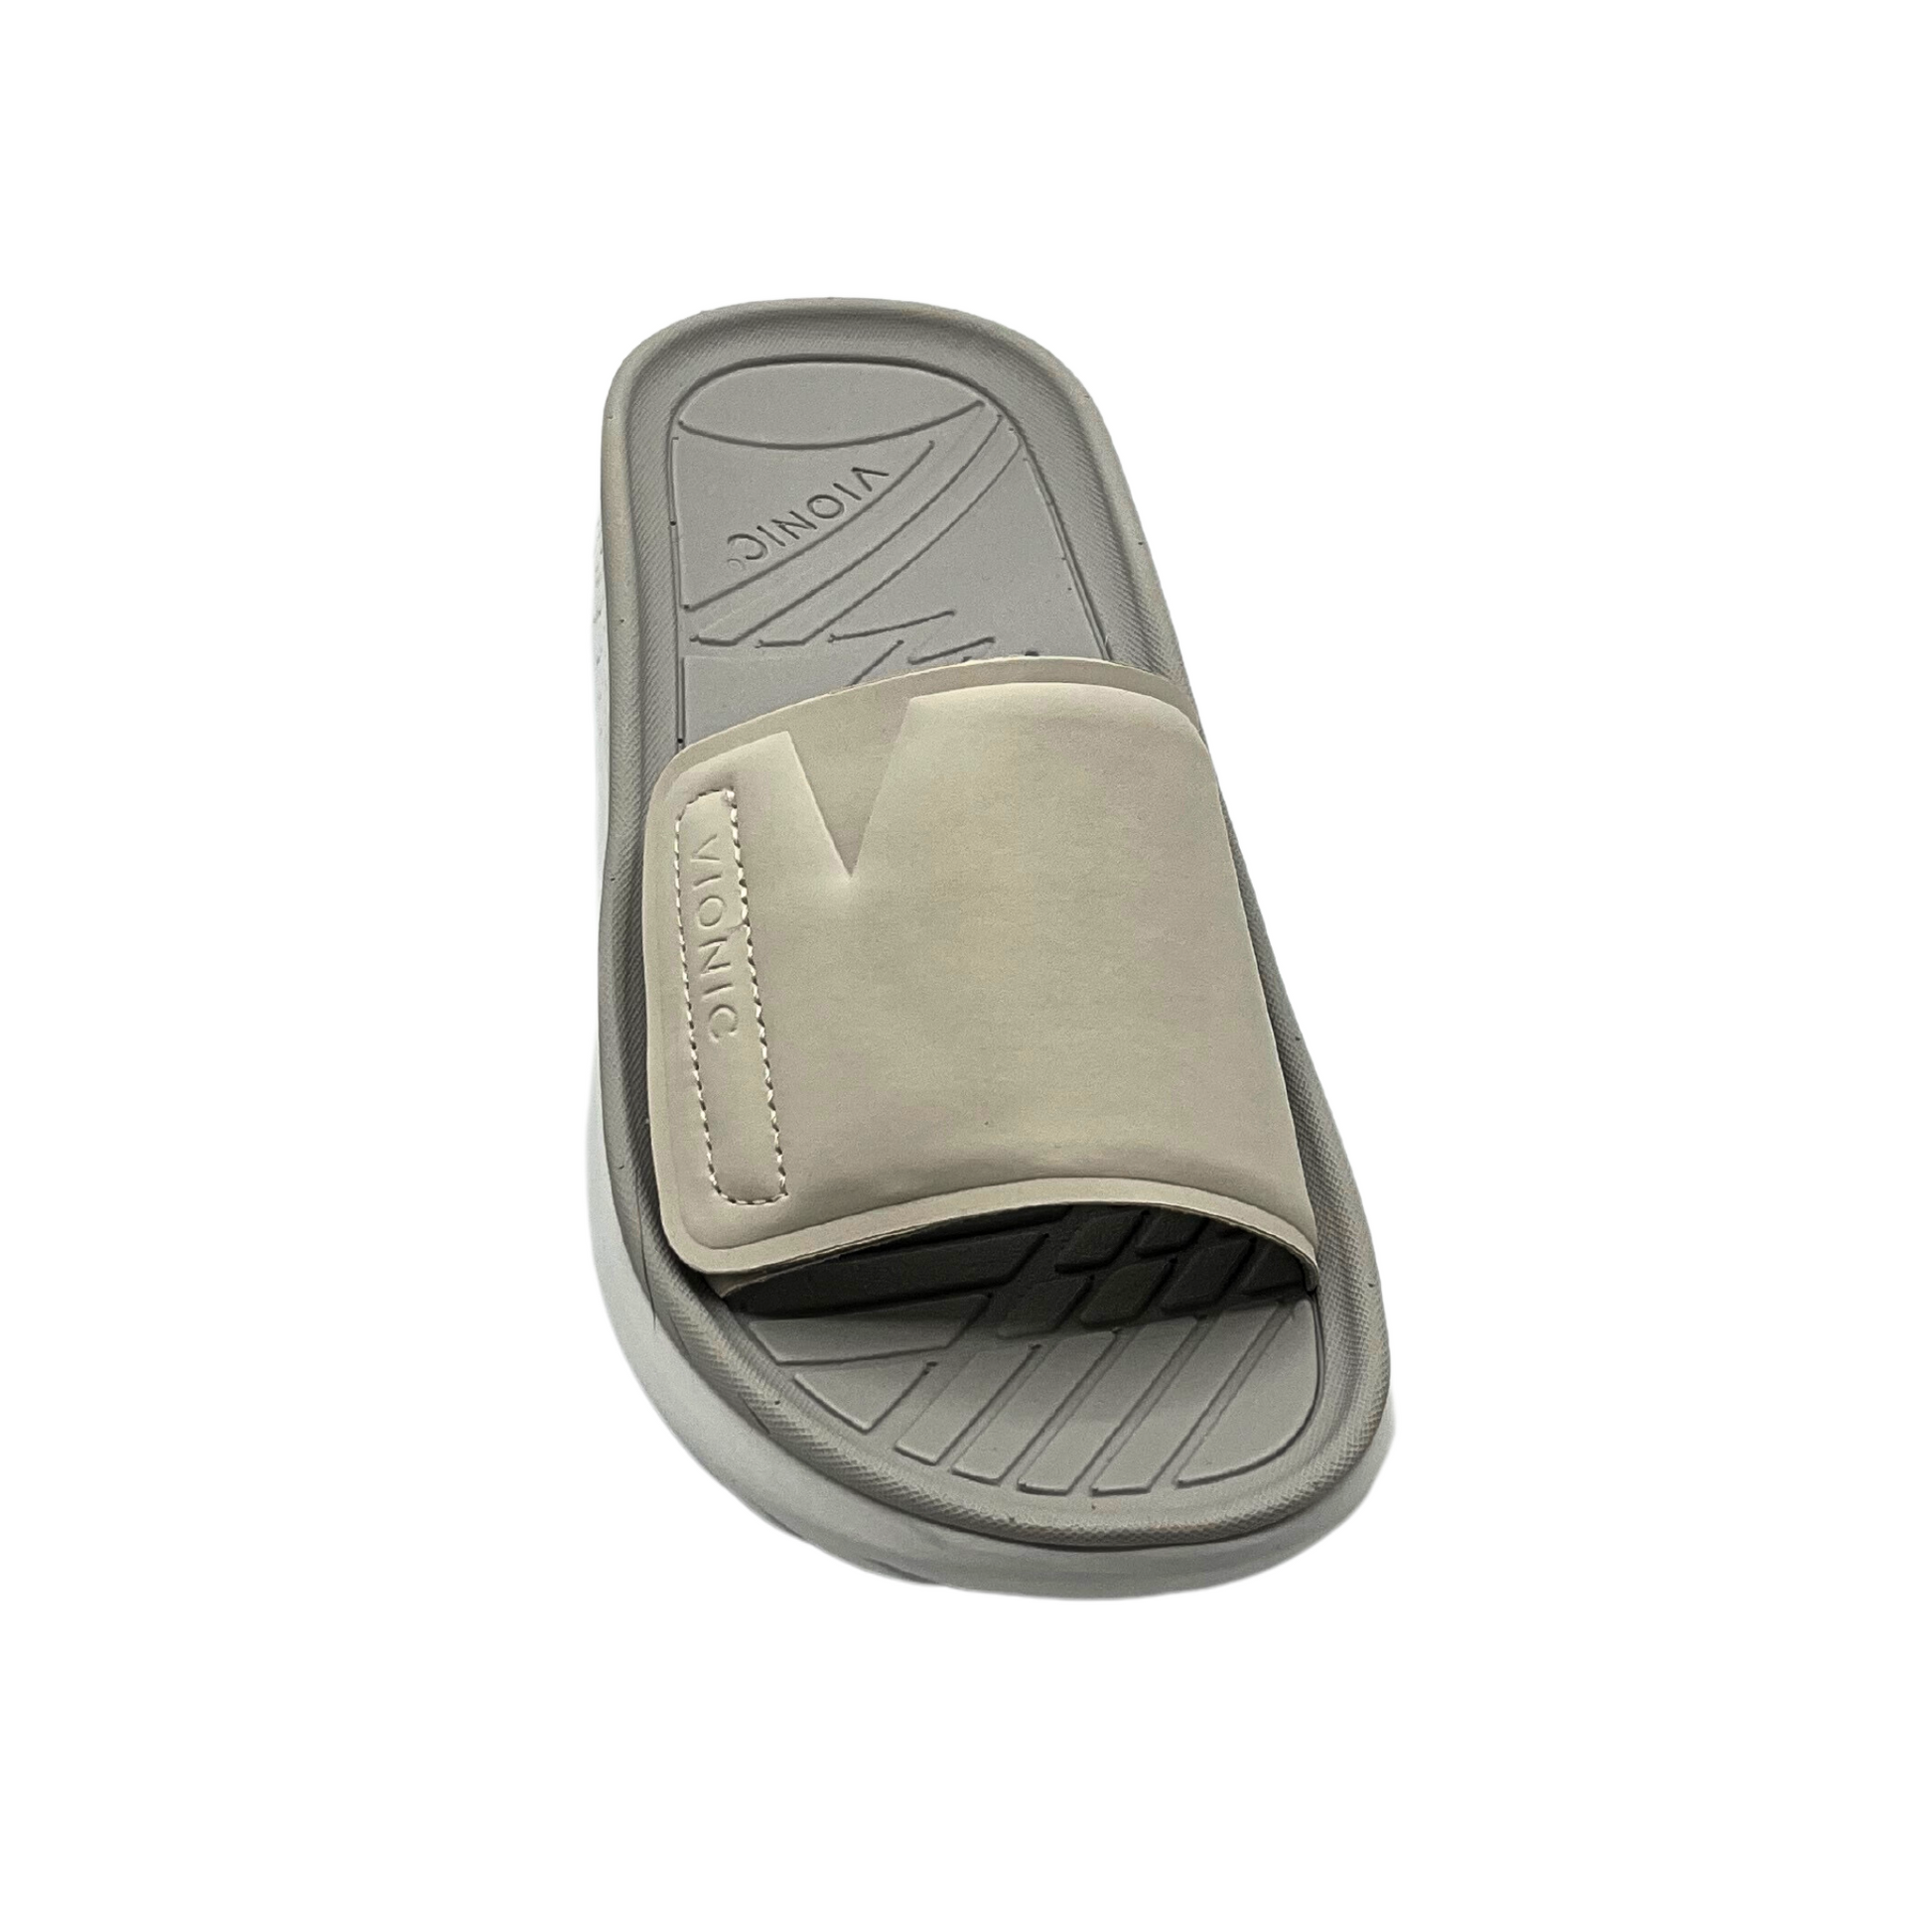 Top down view of a water friendly slide with a supportive footbed.  Two-tone with taupe/grey on top and a light cream on sole.  One strap across forefoot with a velcro tab to adjust it to fit